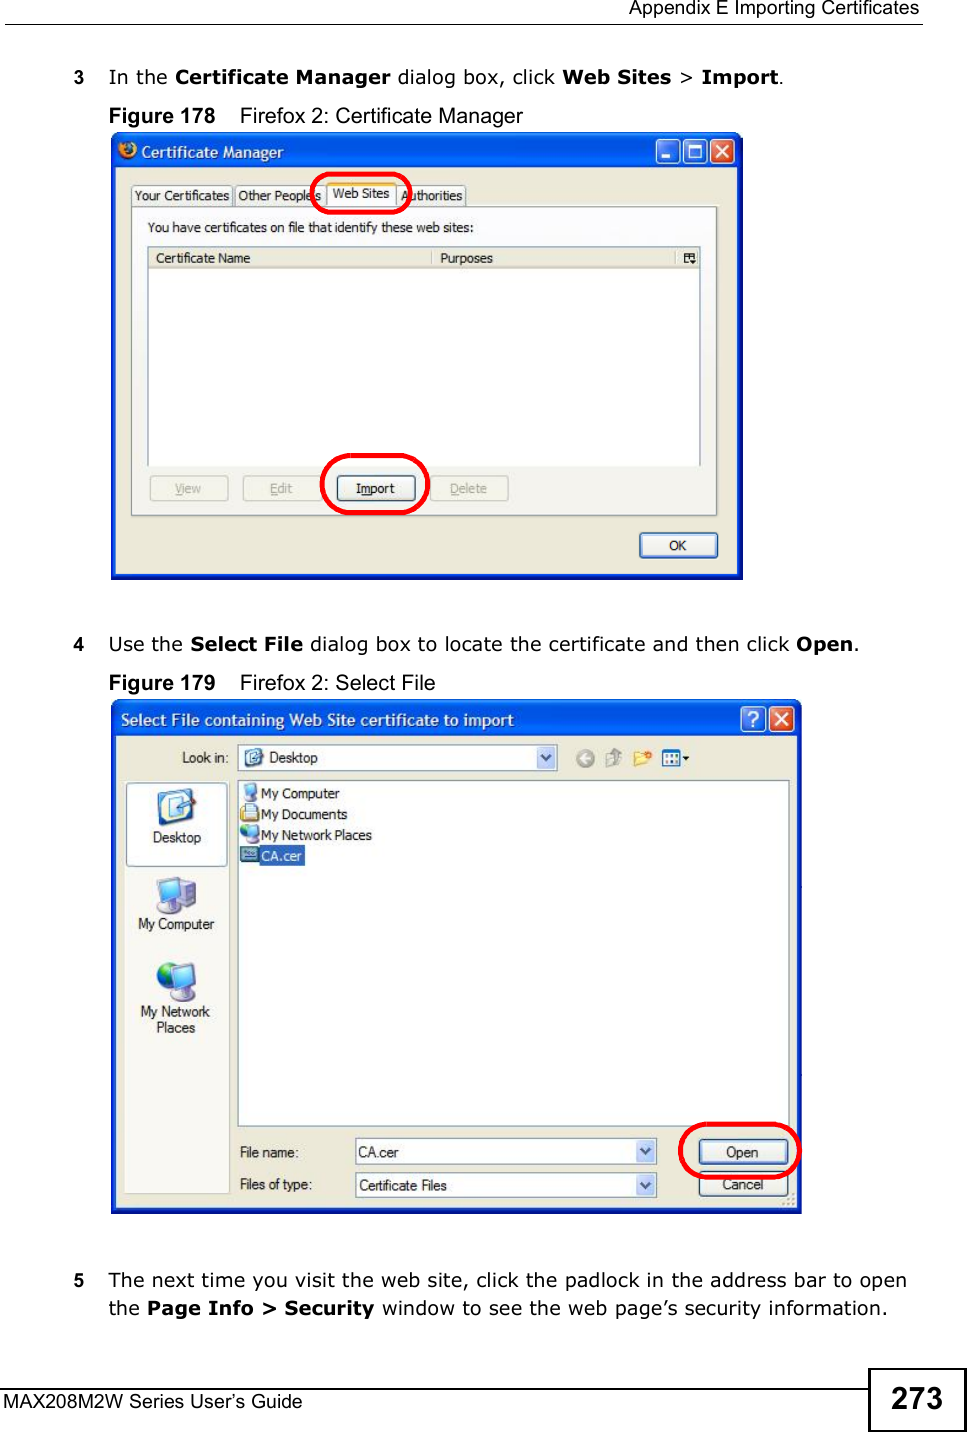  Appendix EImporting CertificatesMAX208M2W Series User s Guide 2733In the Certificate Manager dialog box, click Web Sites &gt; Import.Figure 178    Firefox 2: Certificate Manager4Use the Select File dialog box to locate the certificate and then click Open.Figure 179    Firefox 2: Select File5The next time you visit the web site, click the padlock in the address bar to open the Page Info &gt; Security window to see the web page s security information.